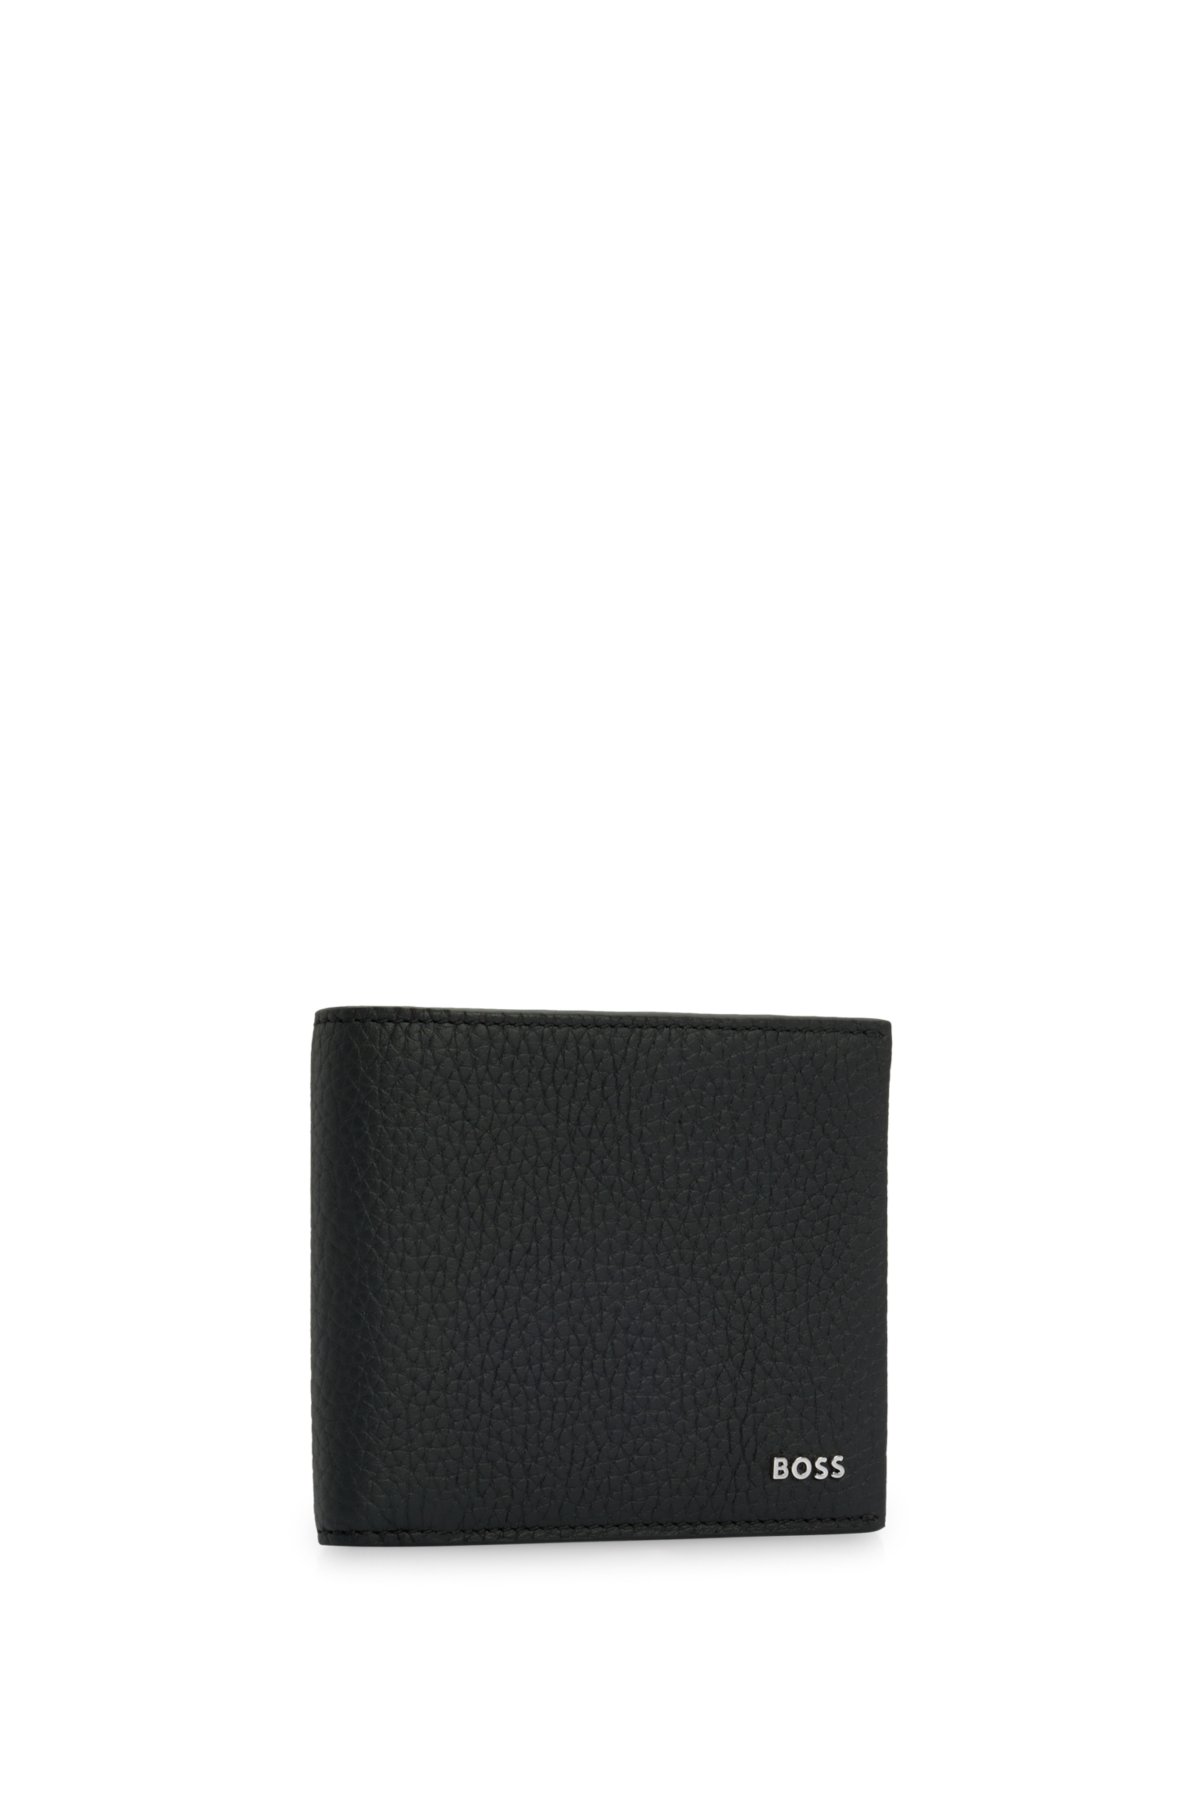 BOSS - Italian-leather wallet with silver-hardware logo